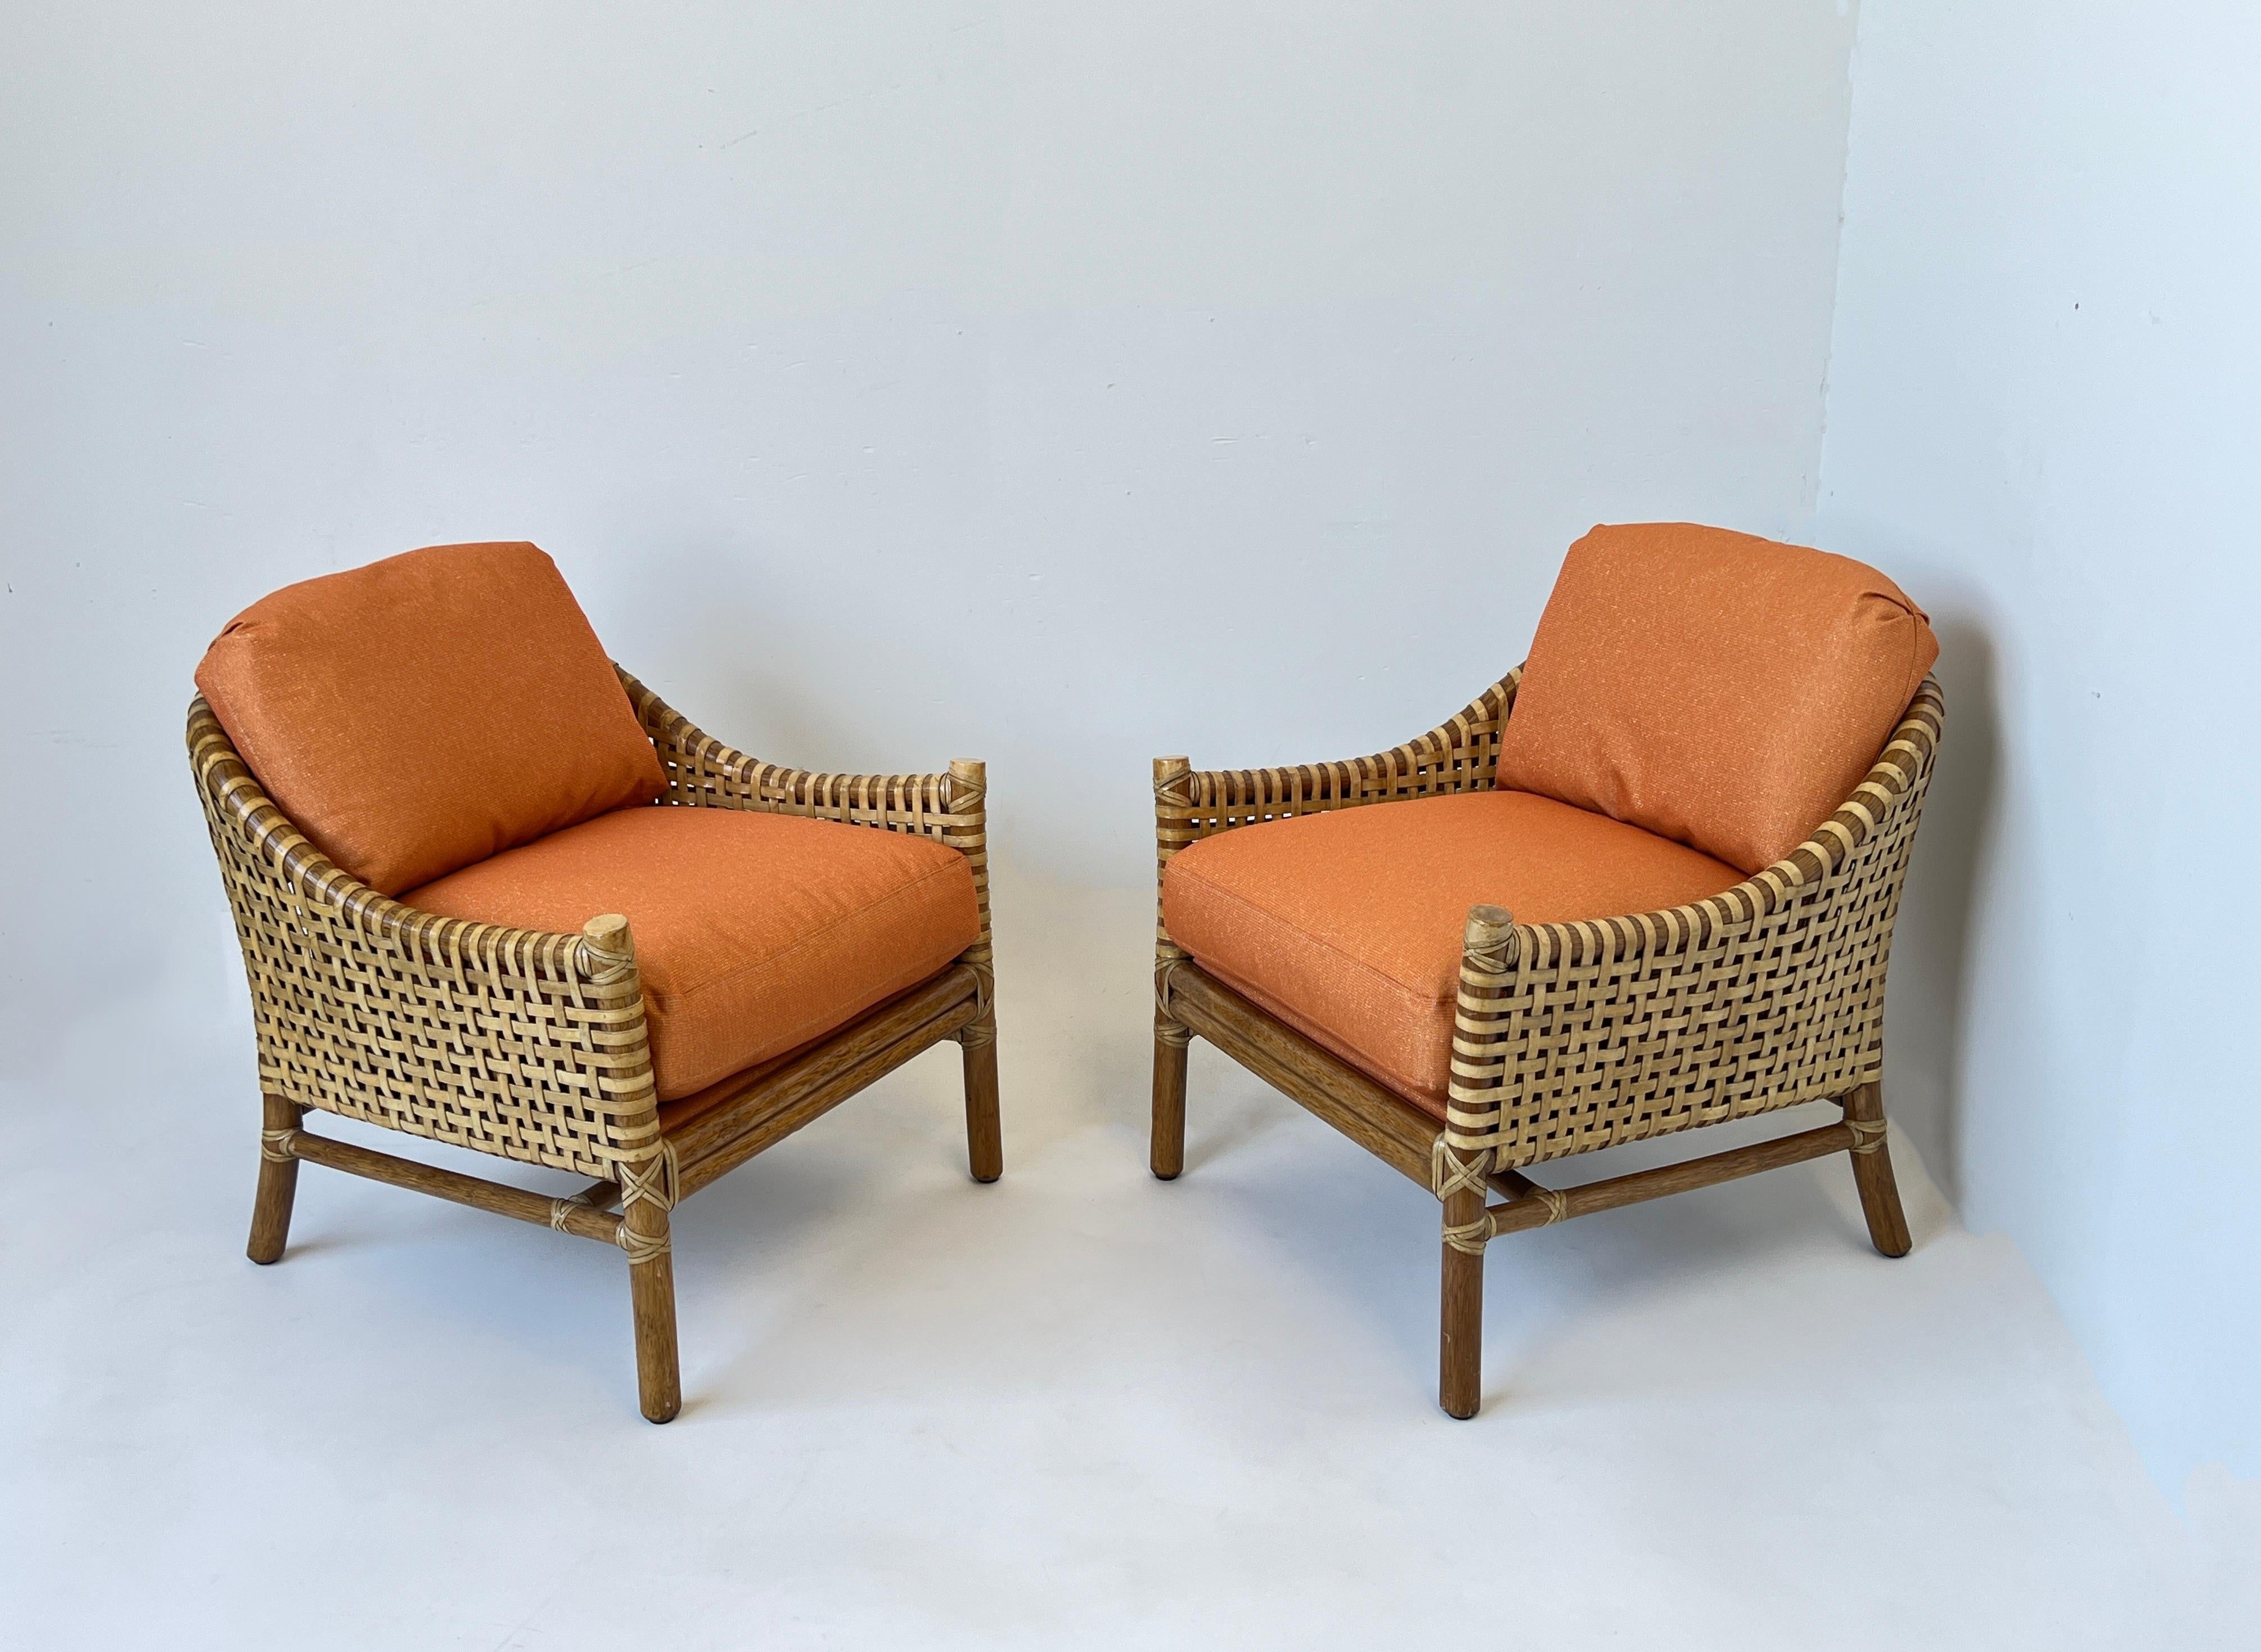 Fabulous pair of bamboo and woven rawhide Lounge chairs by McGuire.
The frames are in beautiful original condition, cushions have been newly recovered in a orange fabric with gold threads (see detail photos).
Measurements: 31” deep, 27.5” wide,